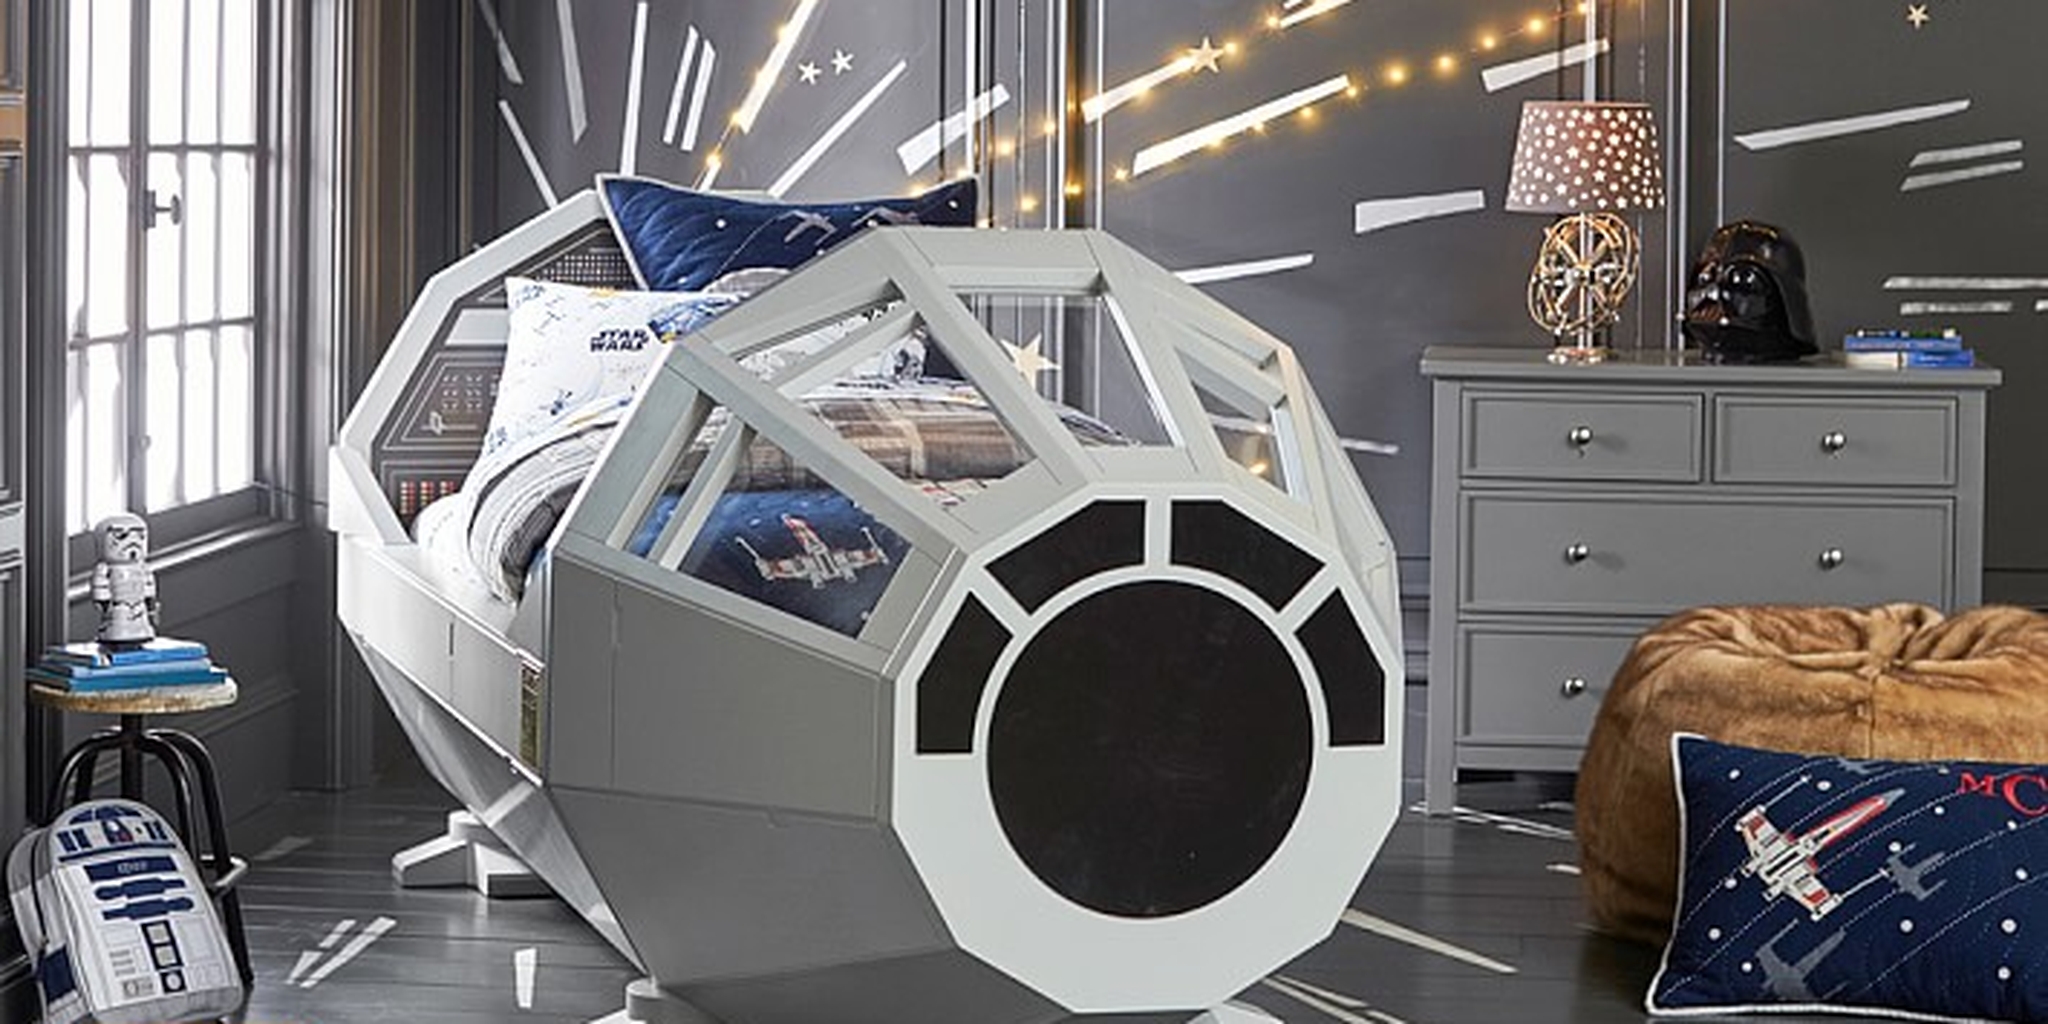 Pottery Barn Kids is selling a nearly $4,000 'Star Wars' bed